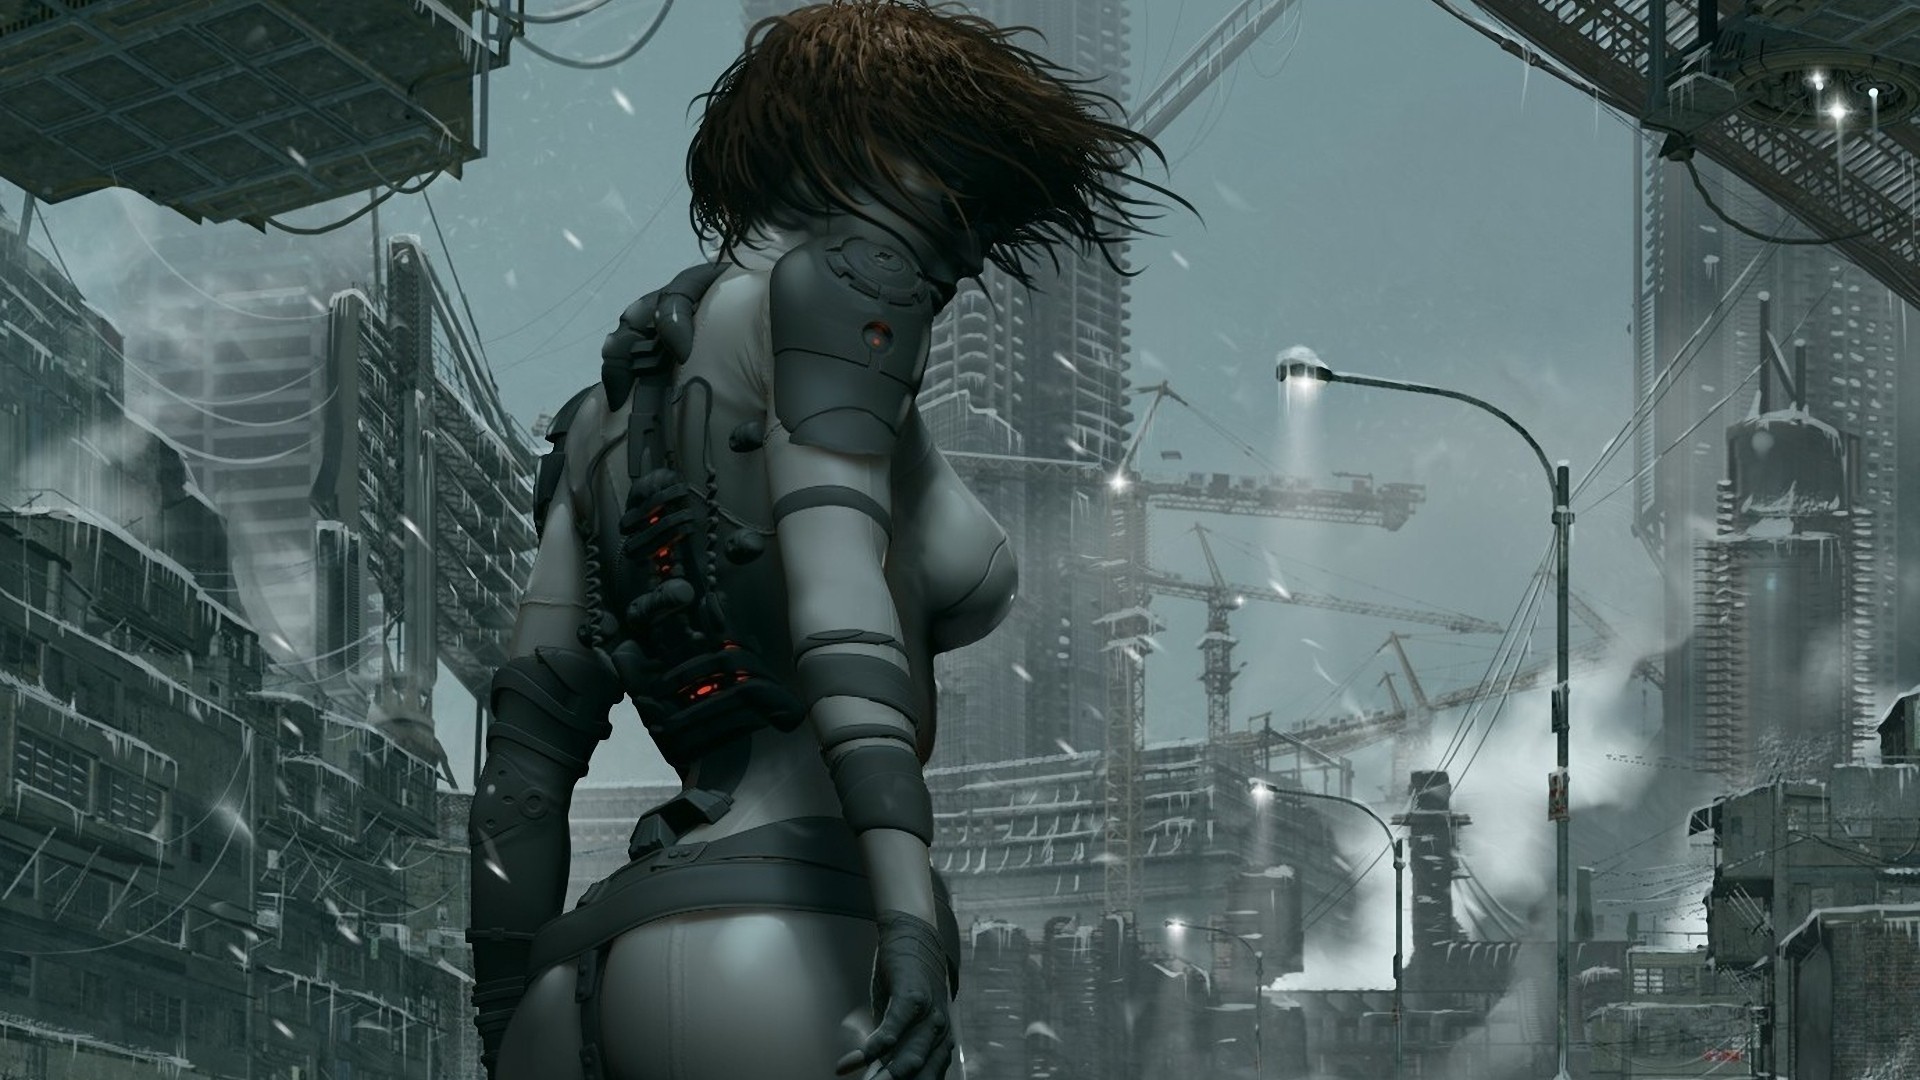 Anime 1920x1080 Ghost in the Shell anime anime girls science fiction city winter cold cyborg